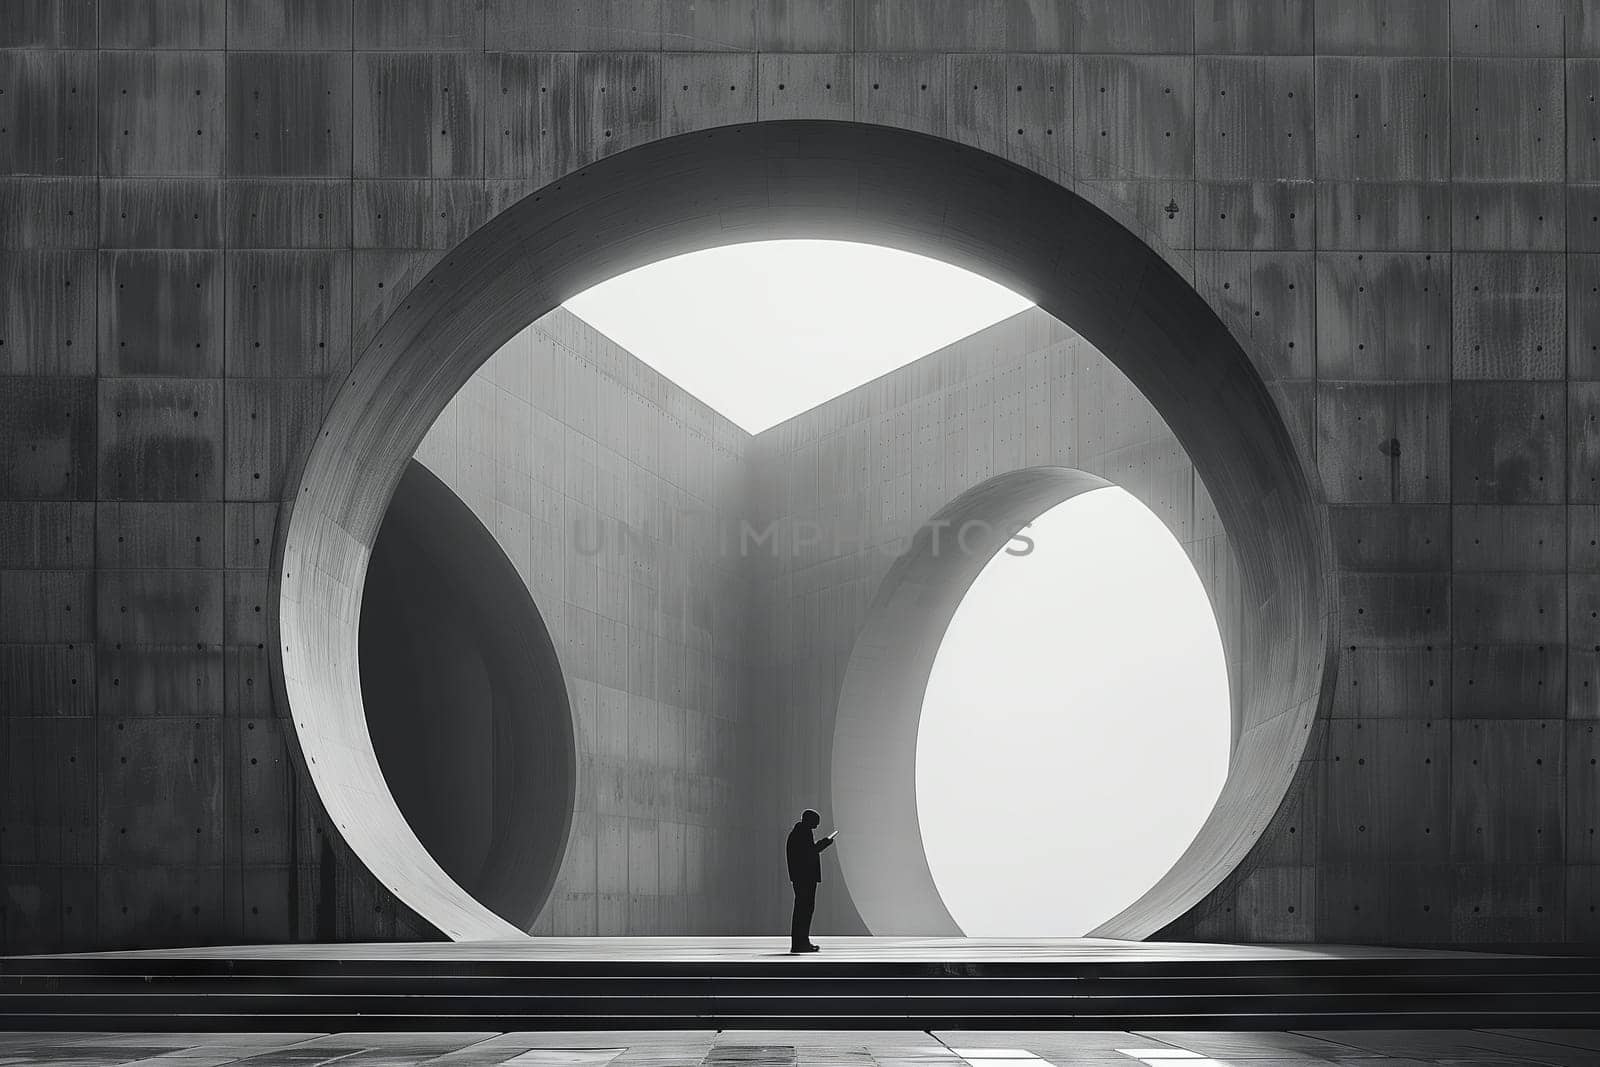 A monochrome image featuring a man posing in front of a massive circular archway. The image showcases automotive tire, rim, and lighting design elements, with a mix of grey tones and wood accents